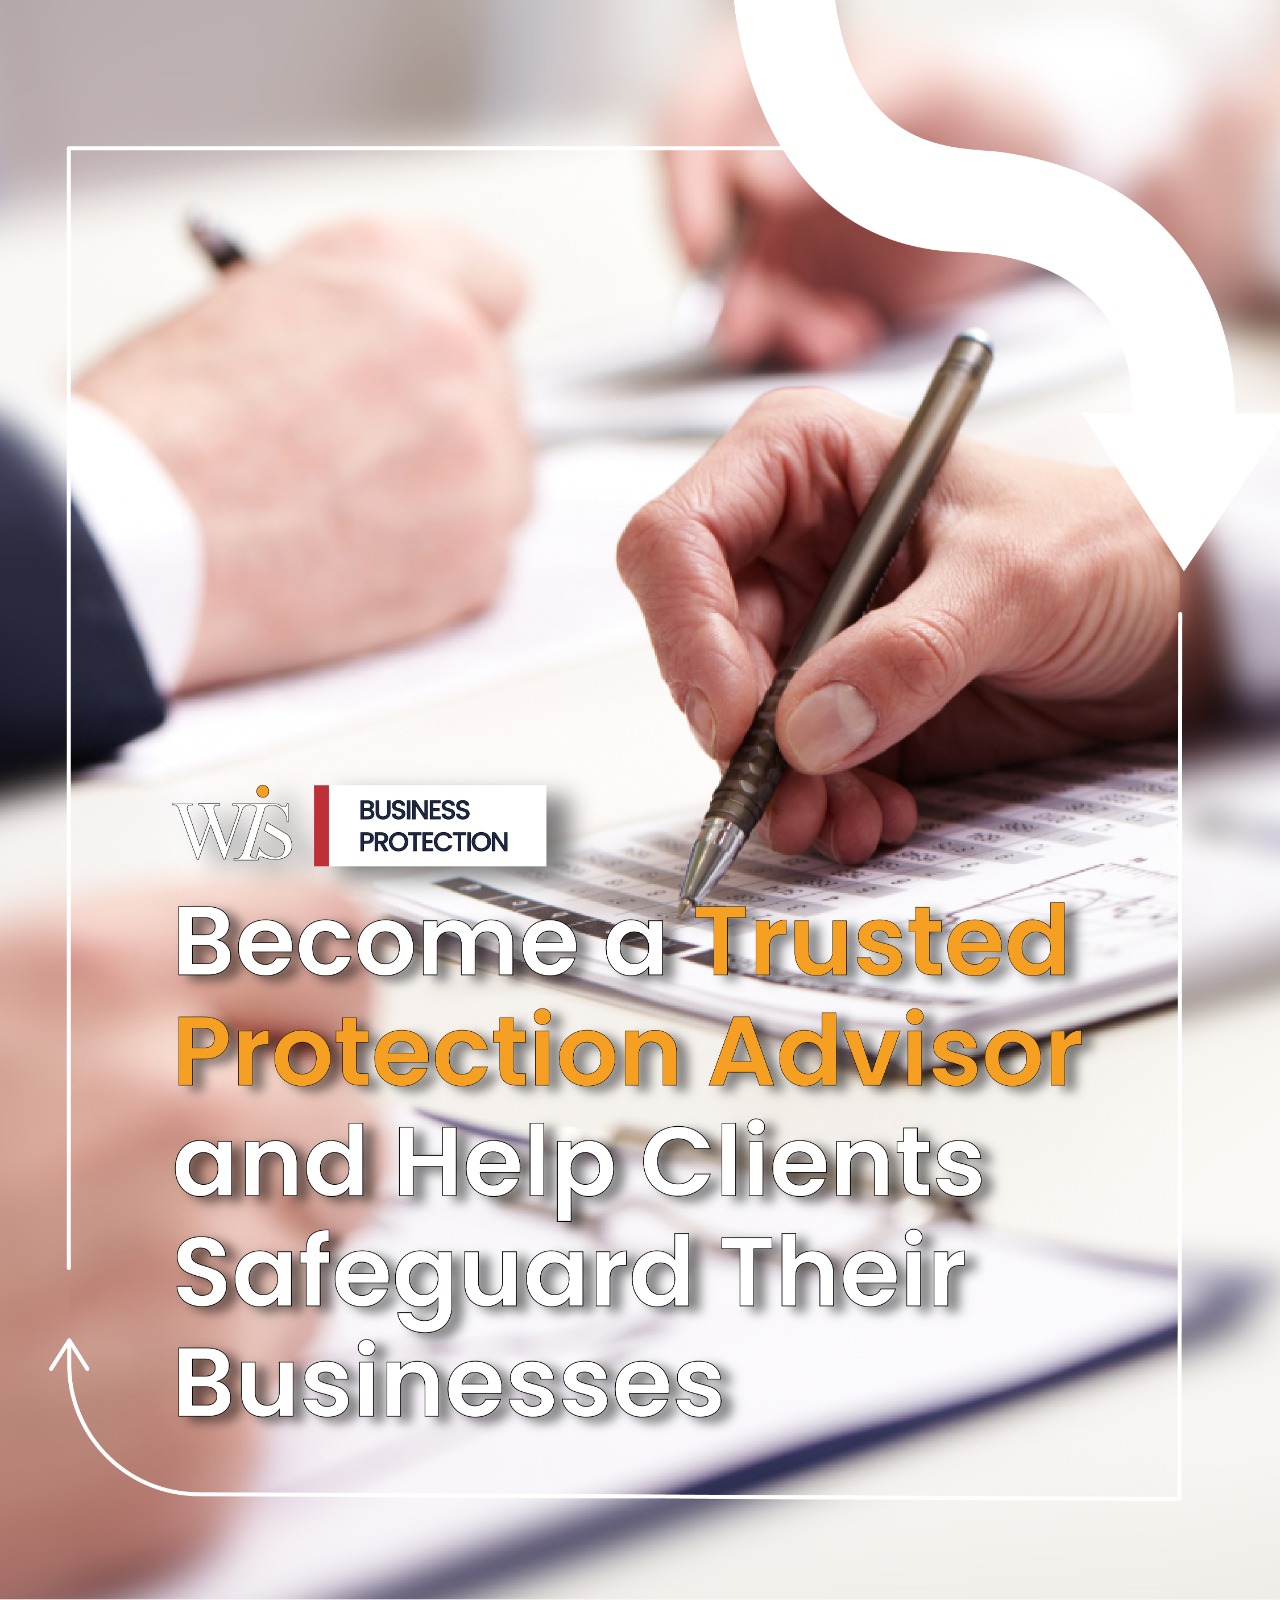 Become a Trusted Protection Advisor & Help Clients Safeguard Their Businesses.